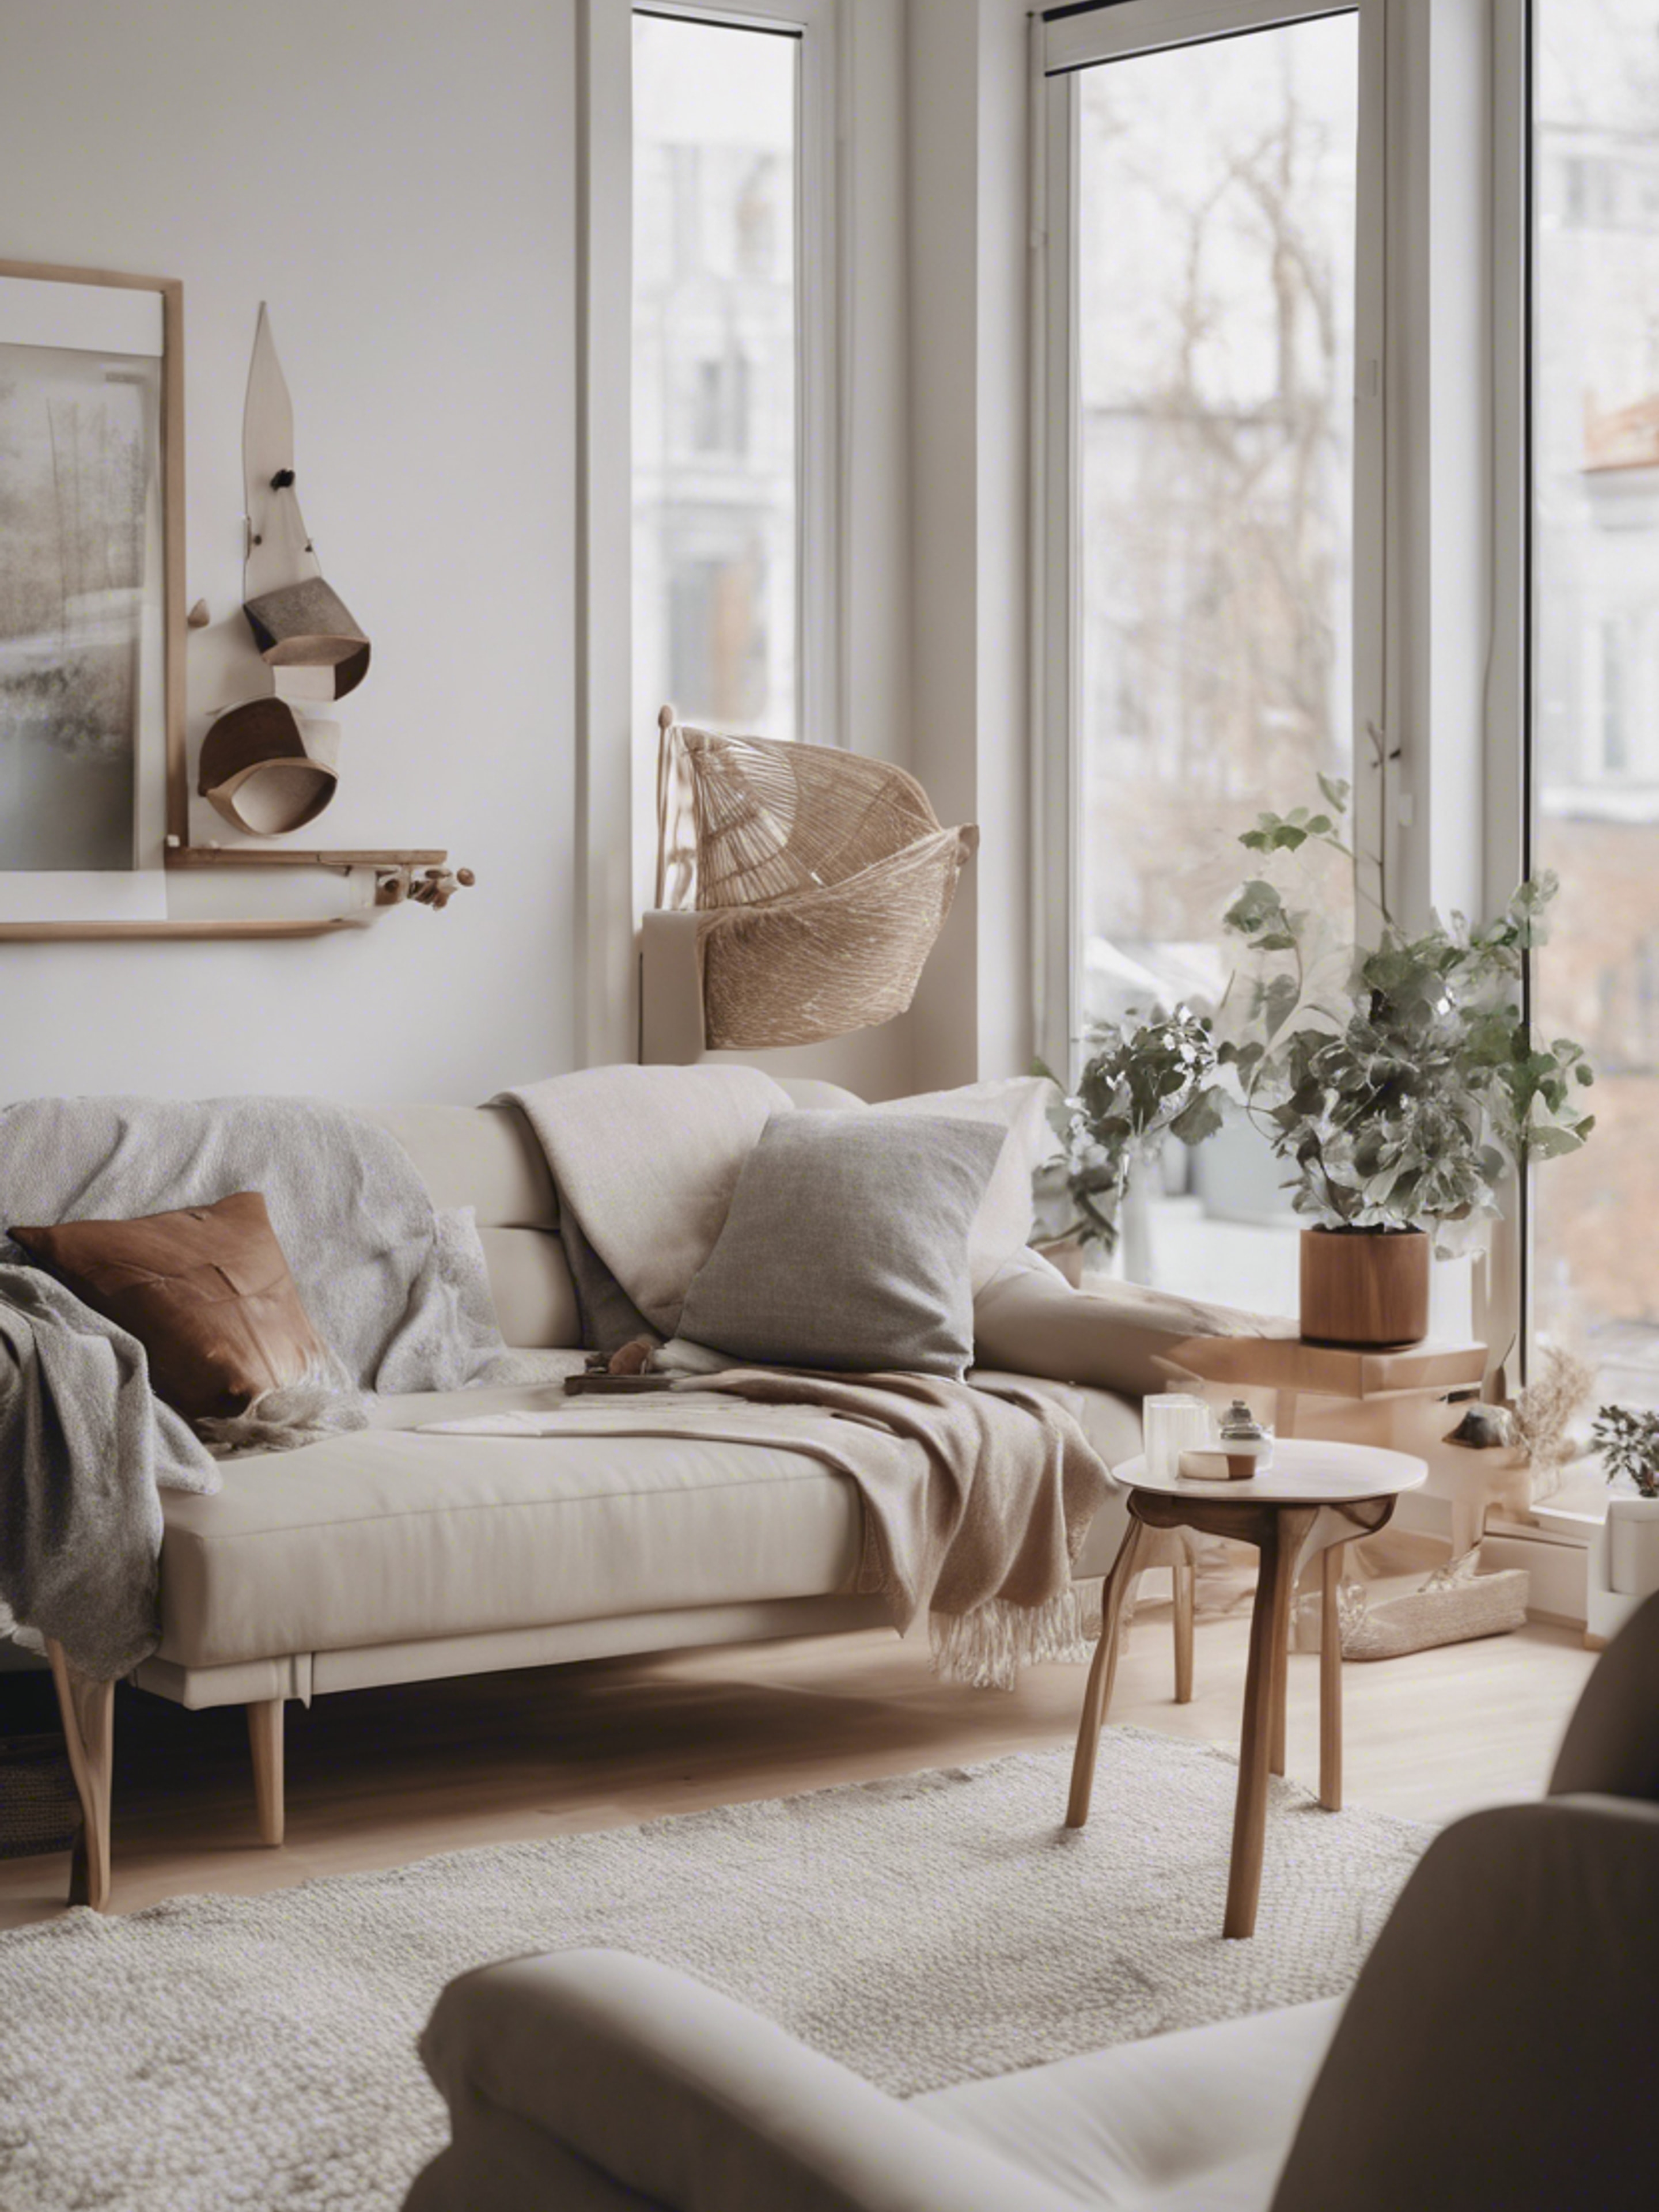 A Nordic-styled apartment with minimalist design, neutral color palette, and cozy accents. Wallpaper[7cbaae500de44ae0bb2d]